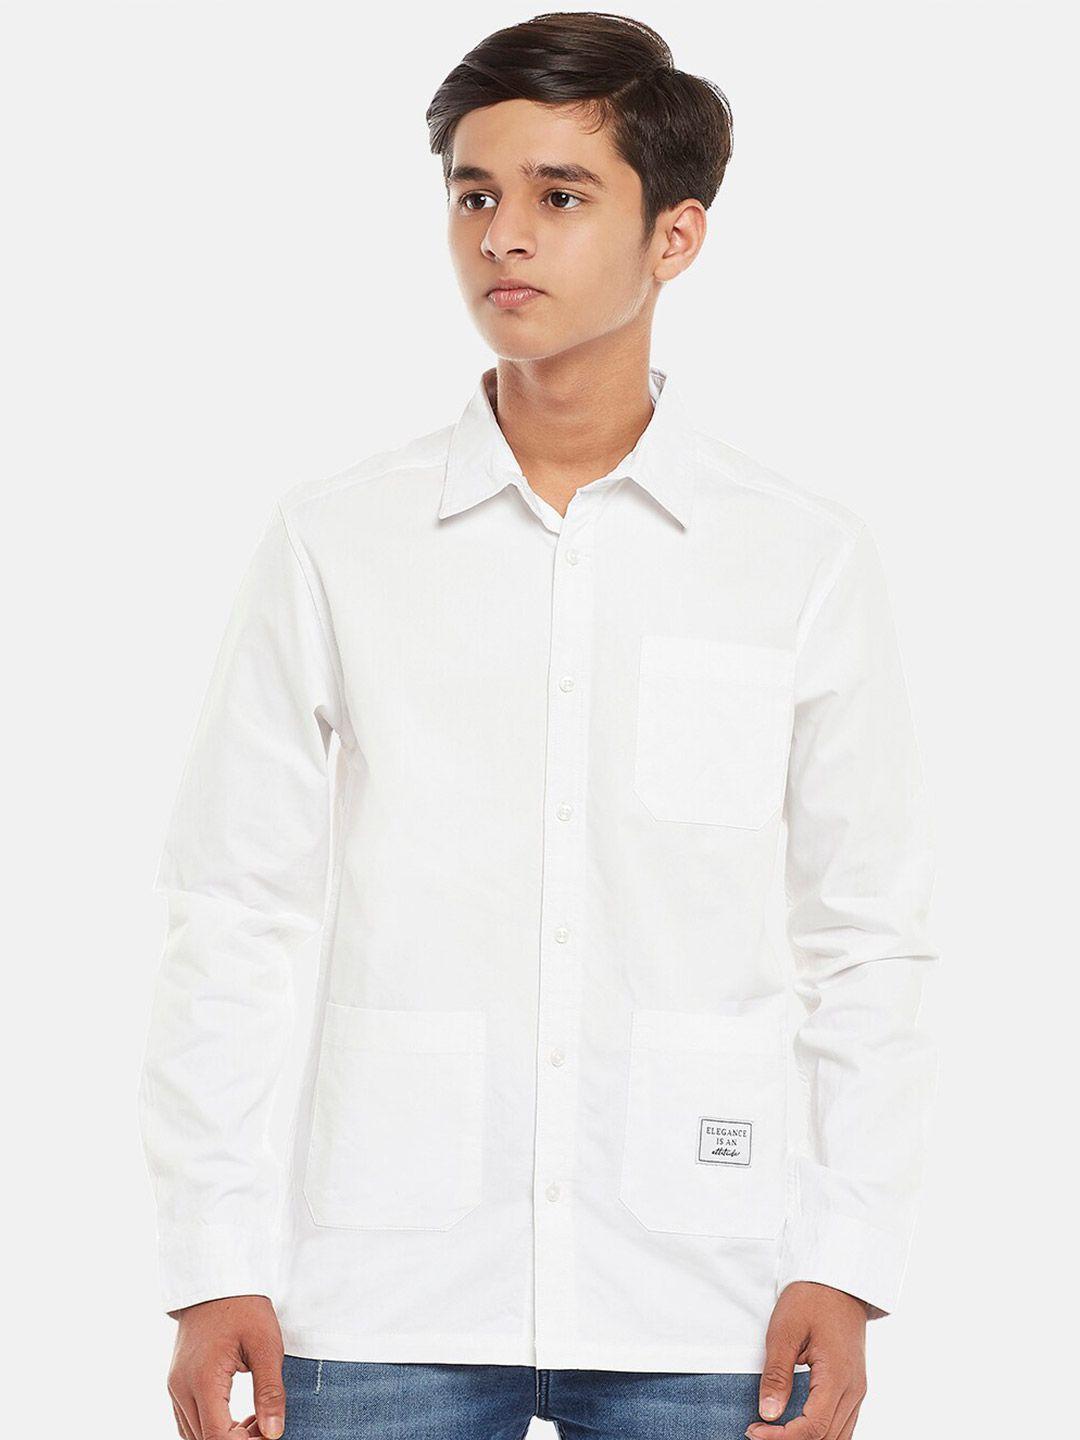 coolsters by pantaloons boys off white casual shirt